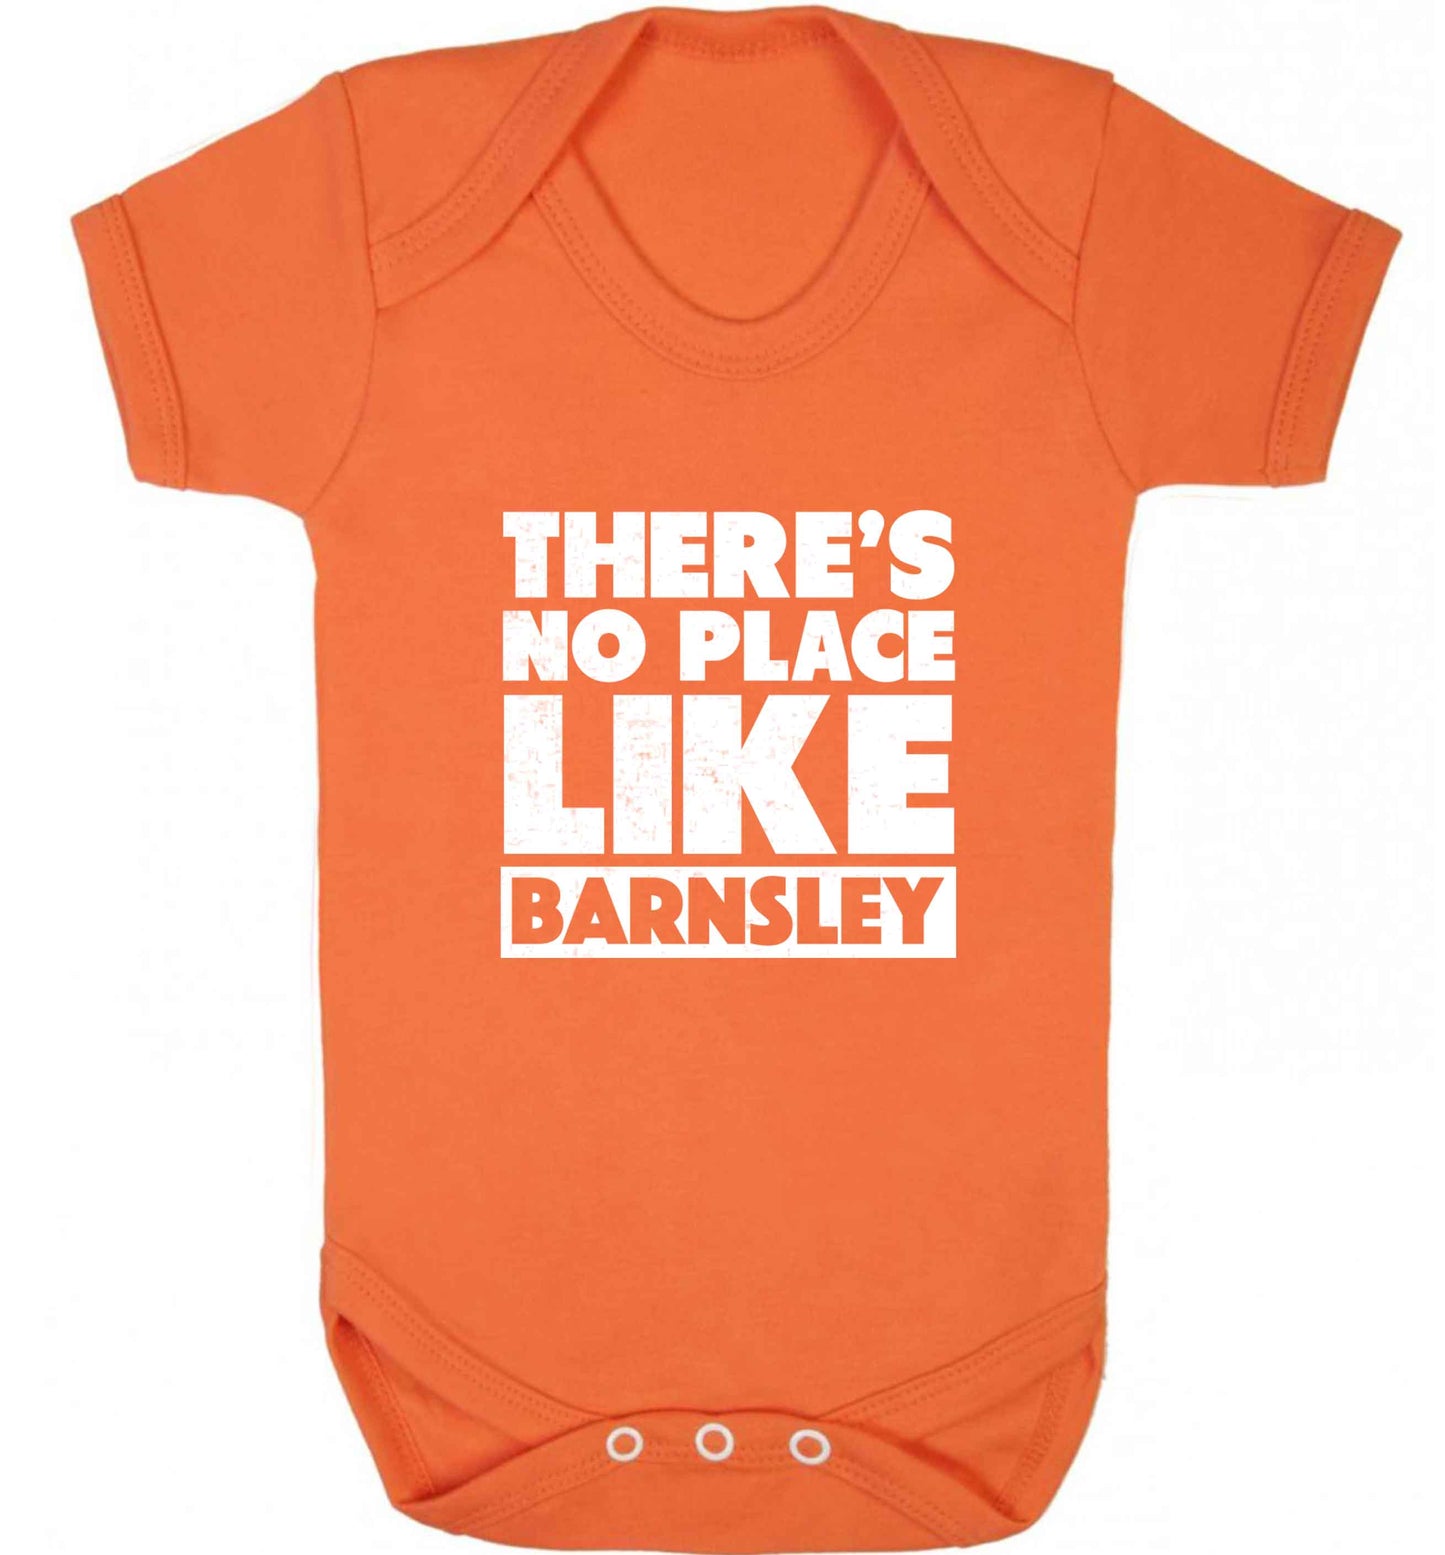 There's No Place Like Barnsley baby vest orange 18-24 months